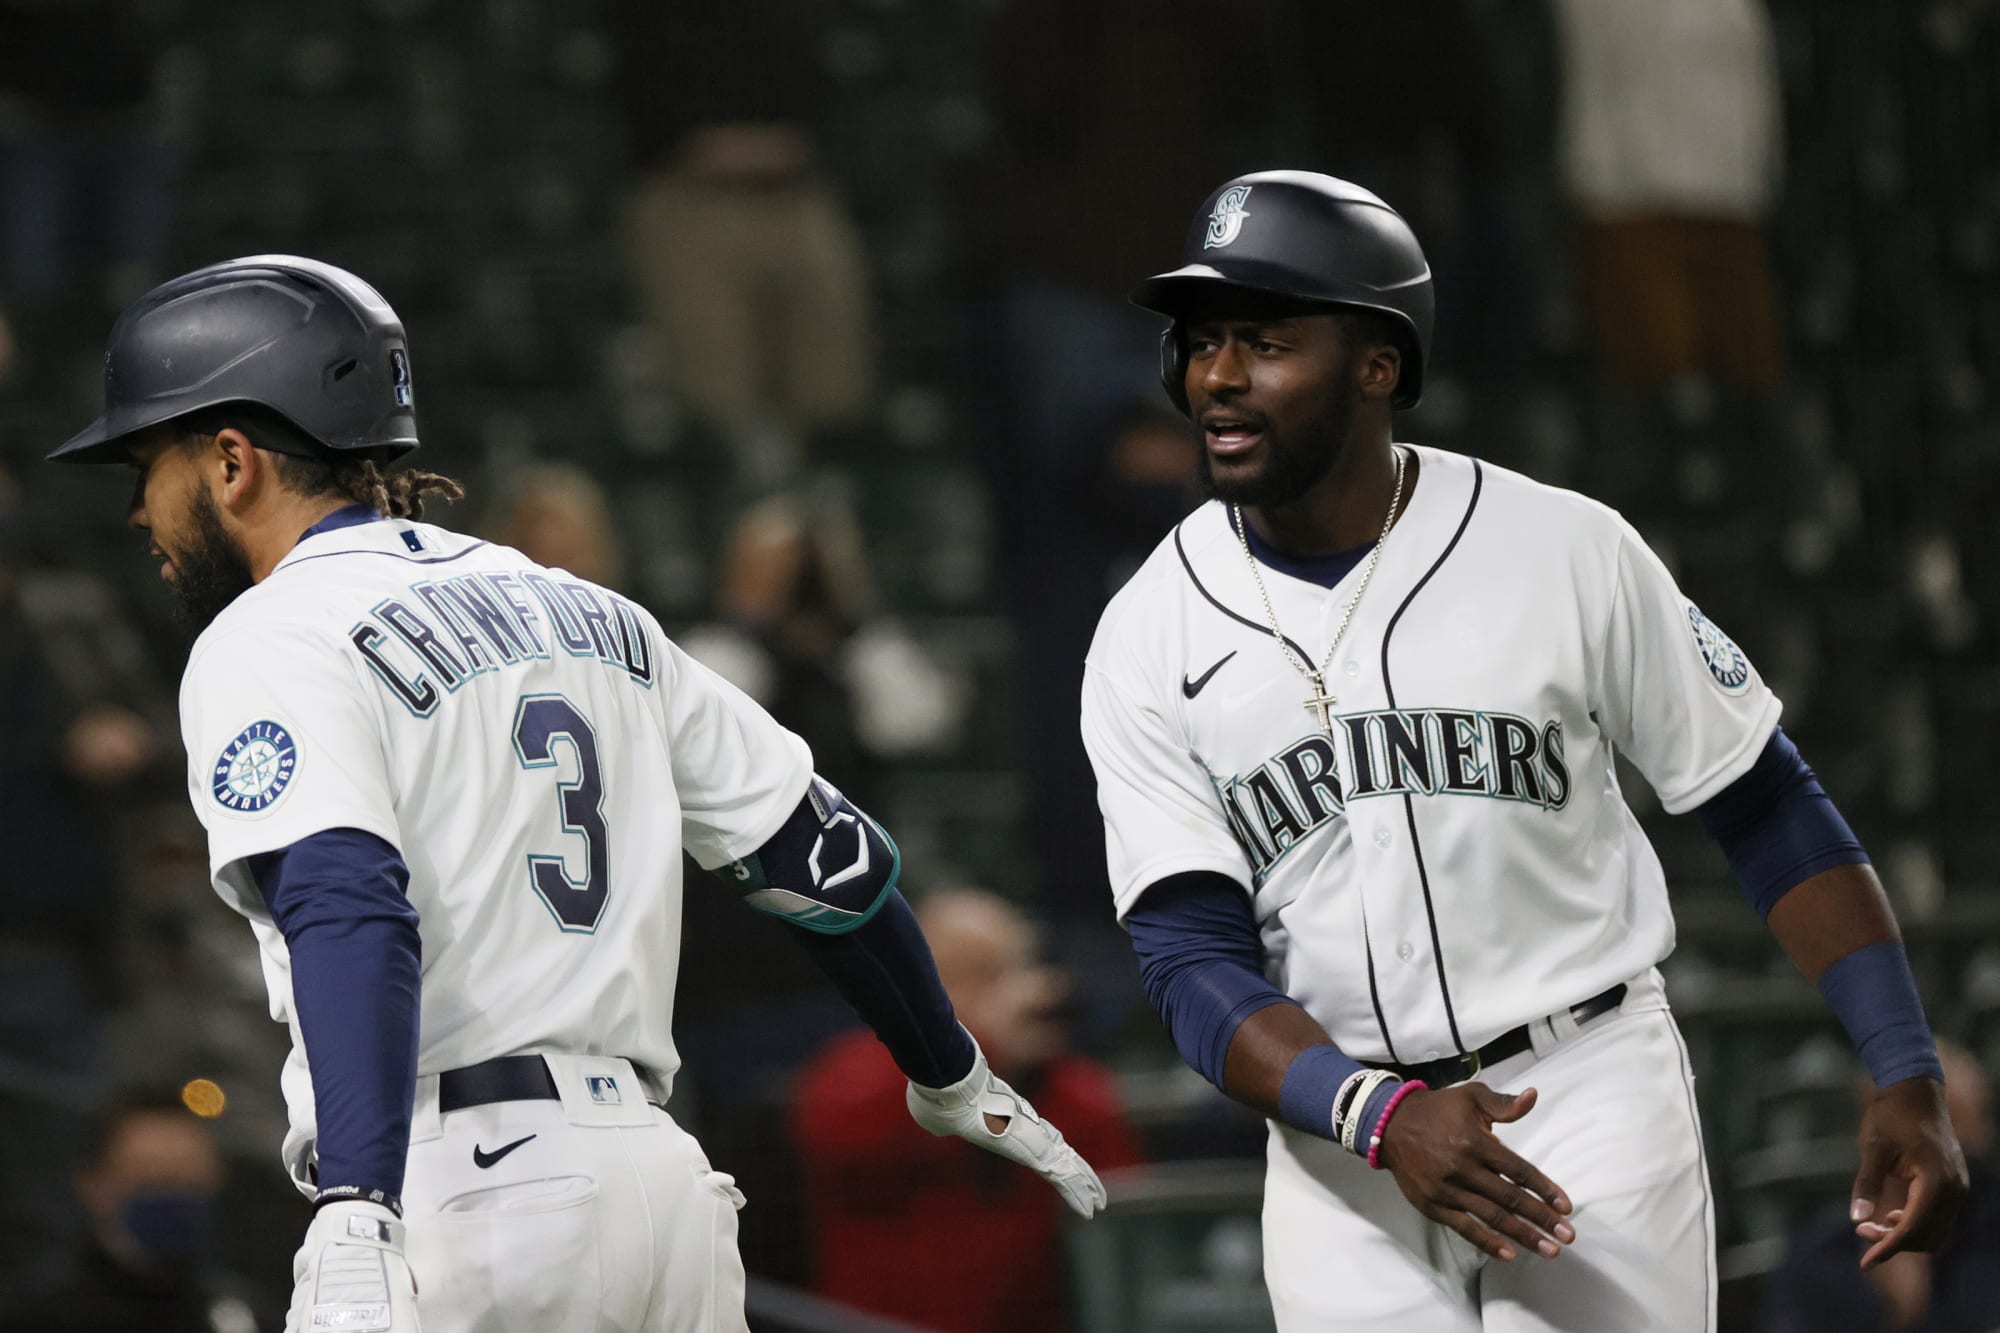 Mariners vs. Giants: Taylor Trammell deserves an A for his MLB debut